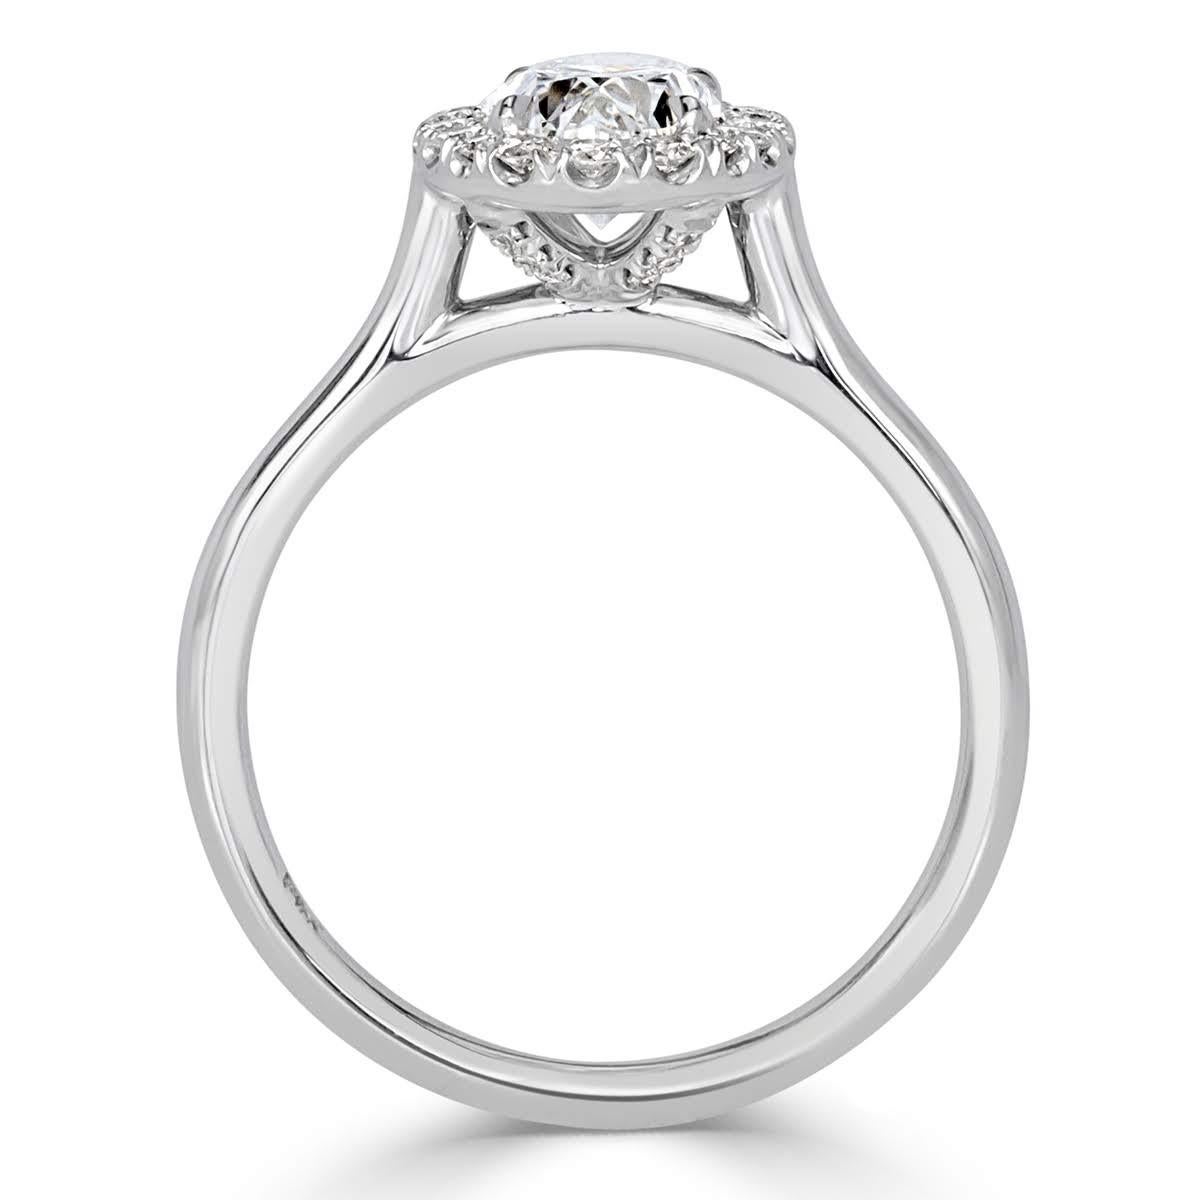 Women's or Men's Mark Broumand 1.24 Carat Oval Cut Diamond Engagement Ring For Sale